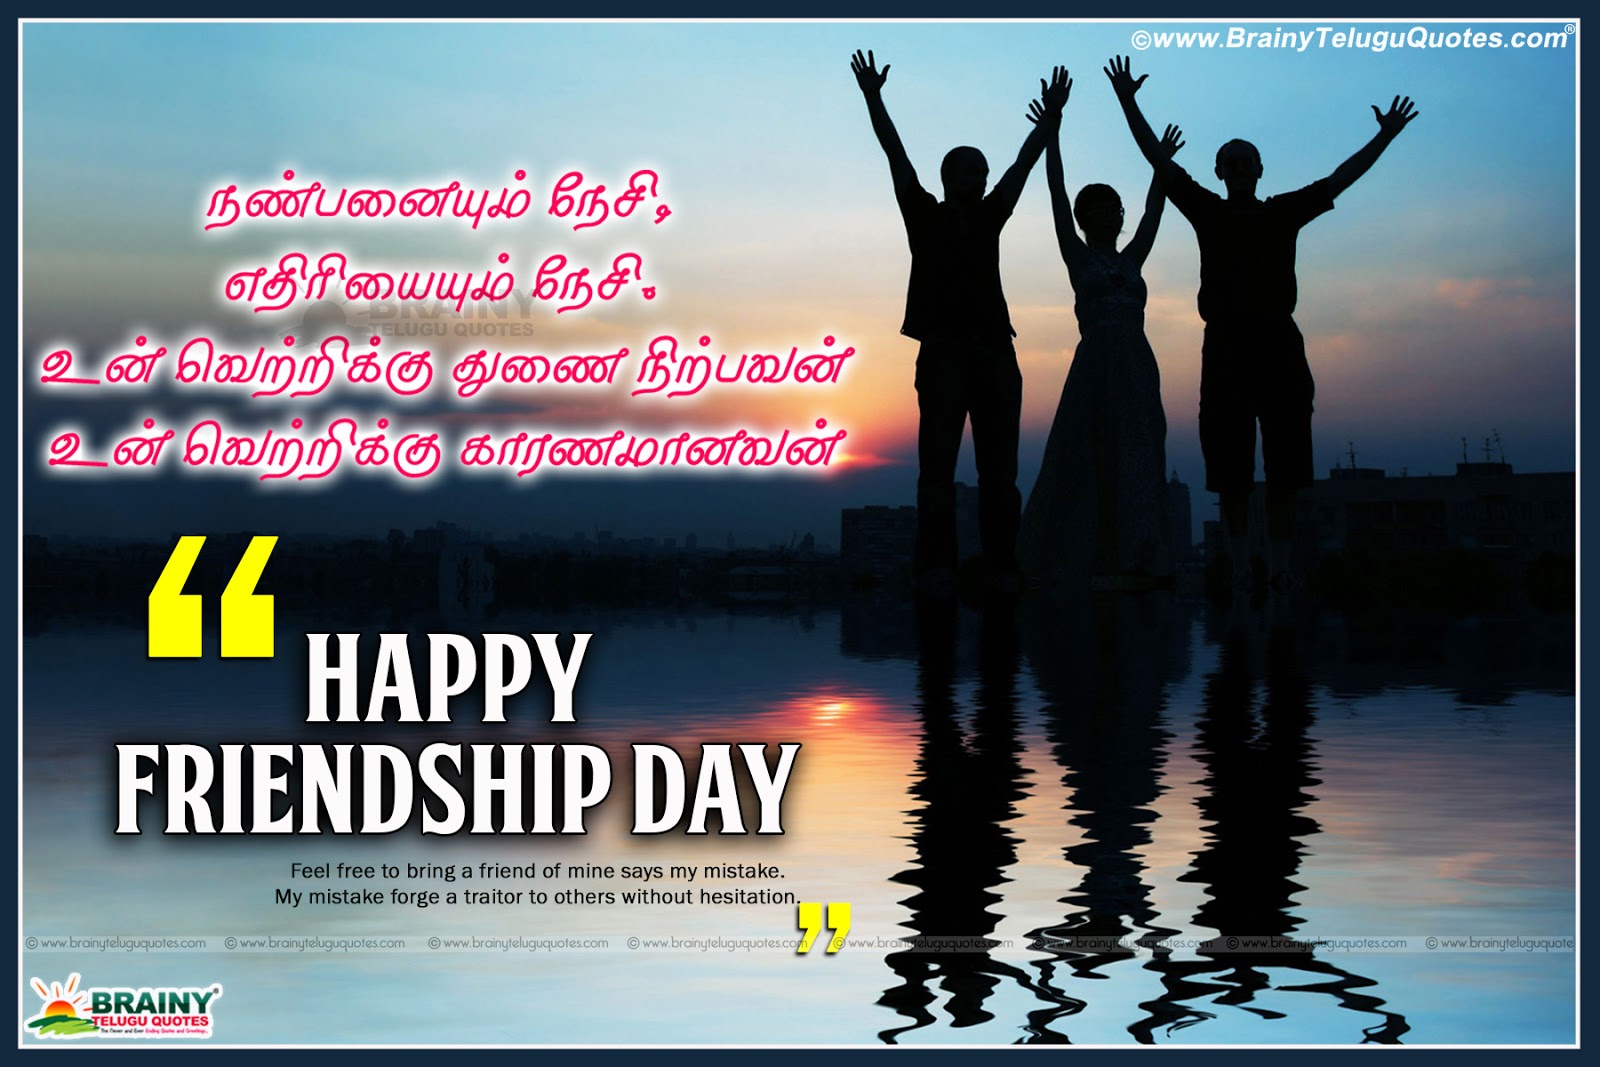 Happy Friendship Day 2019 Thathuvam Quotations wishes in